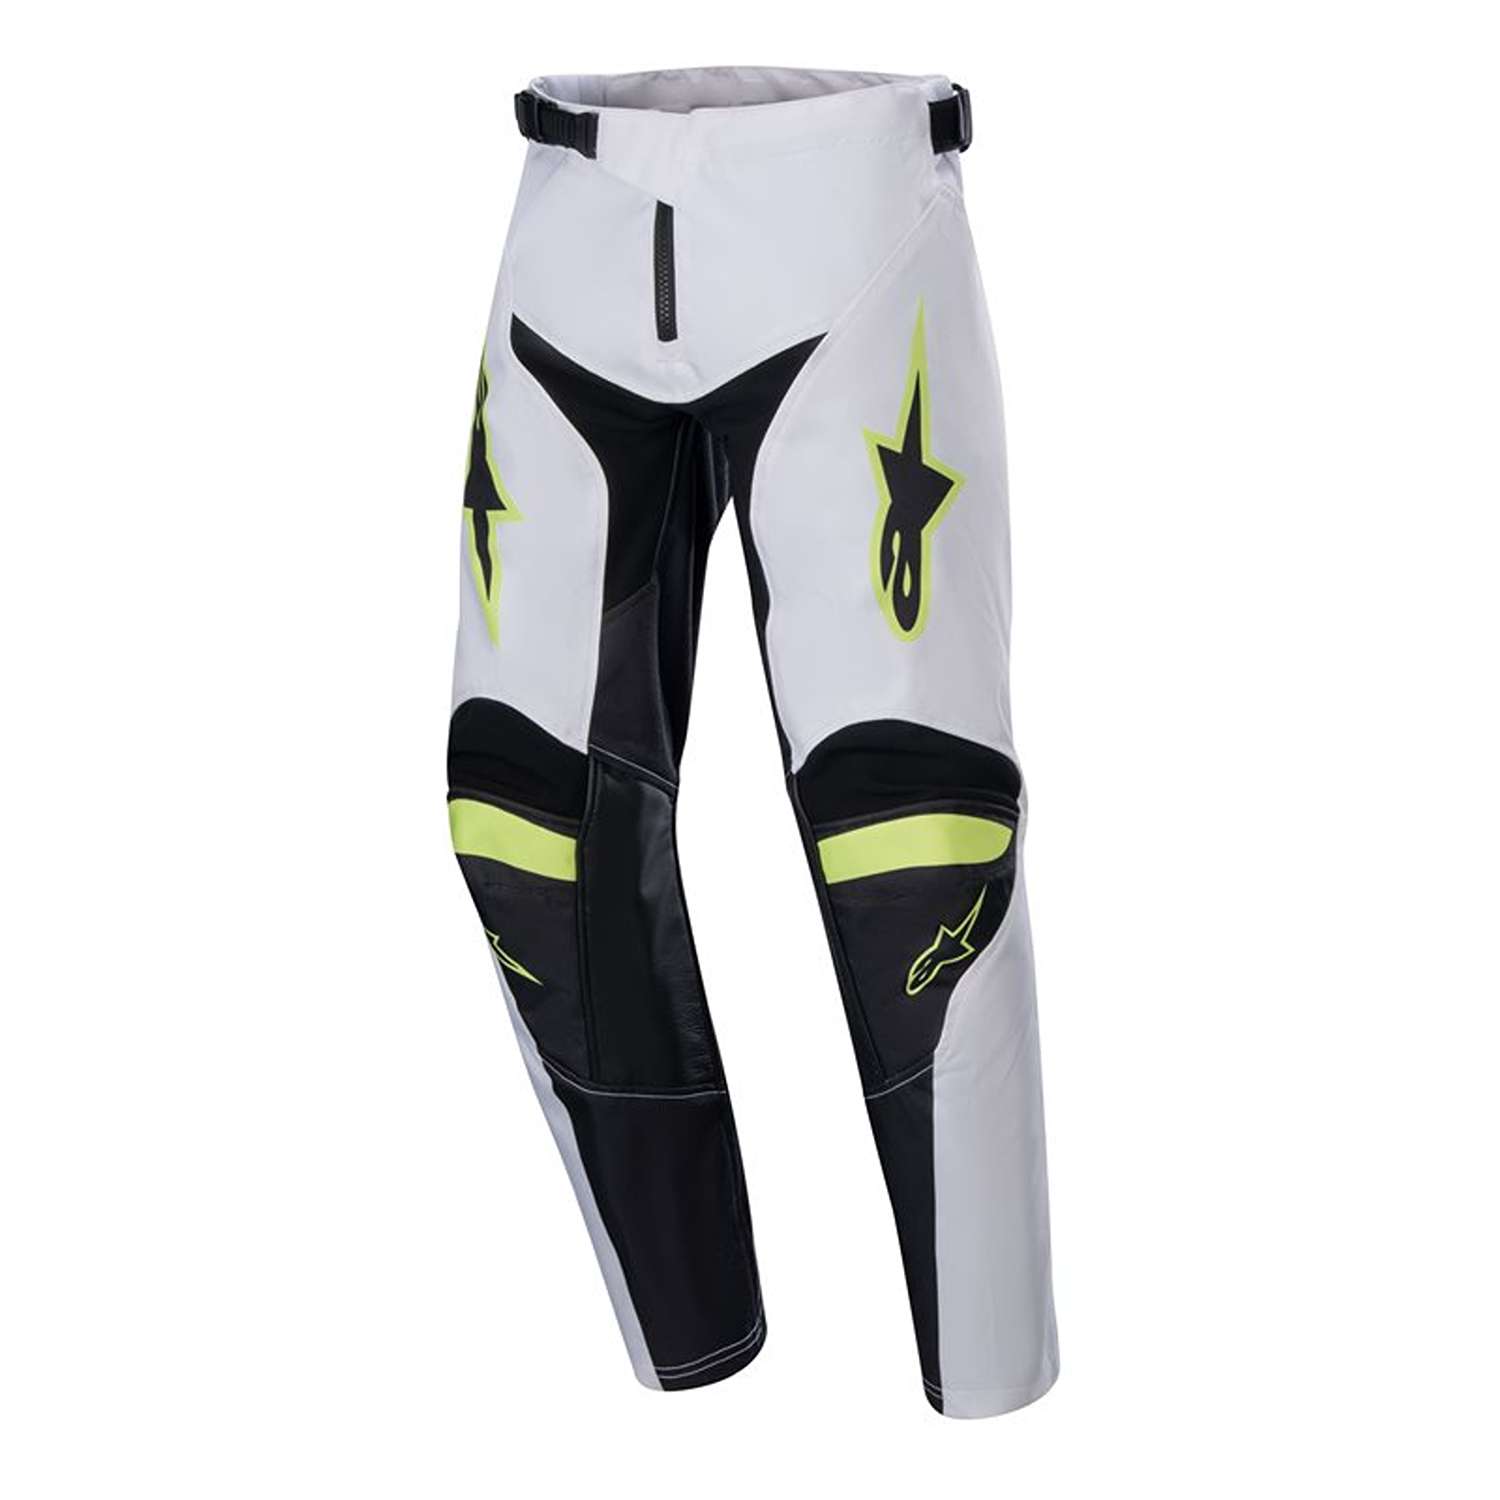 Image of Alpinestars Youth Racer Lucent Pants White Neon Red Yellow Fluo Größe 22